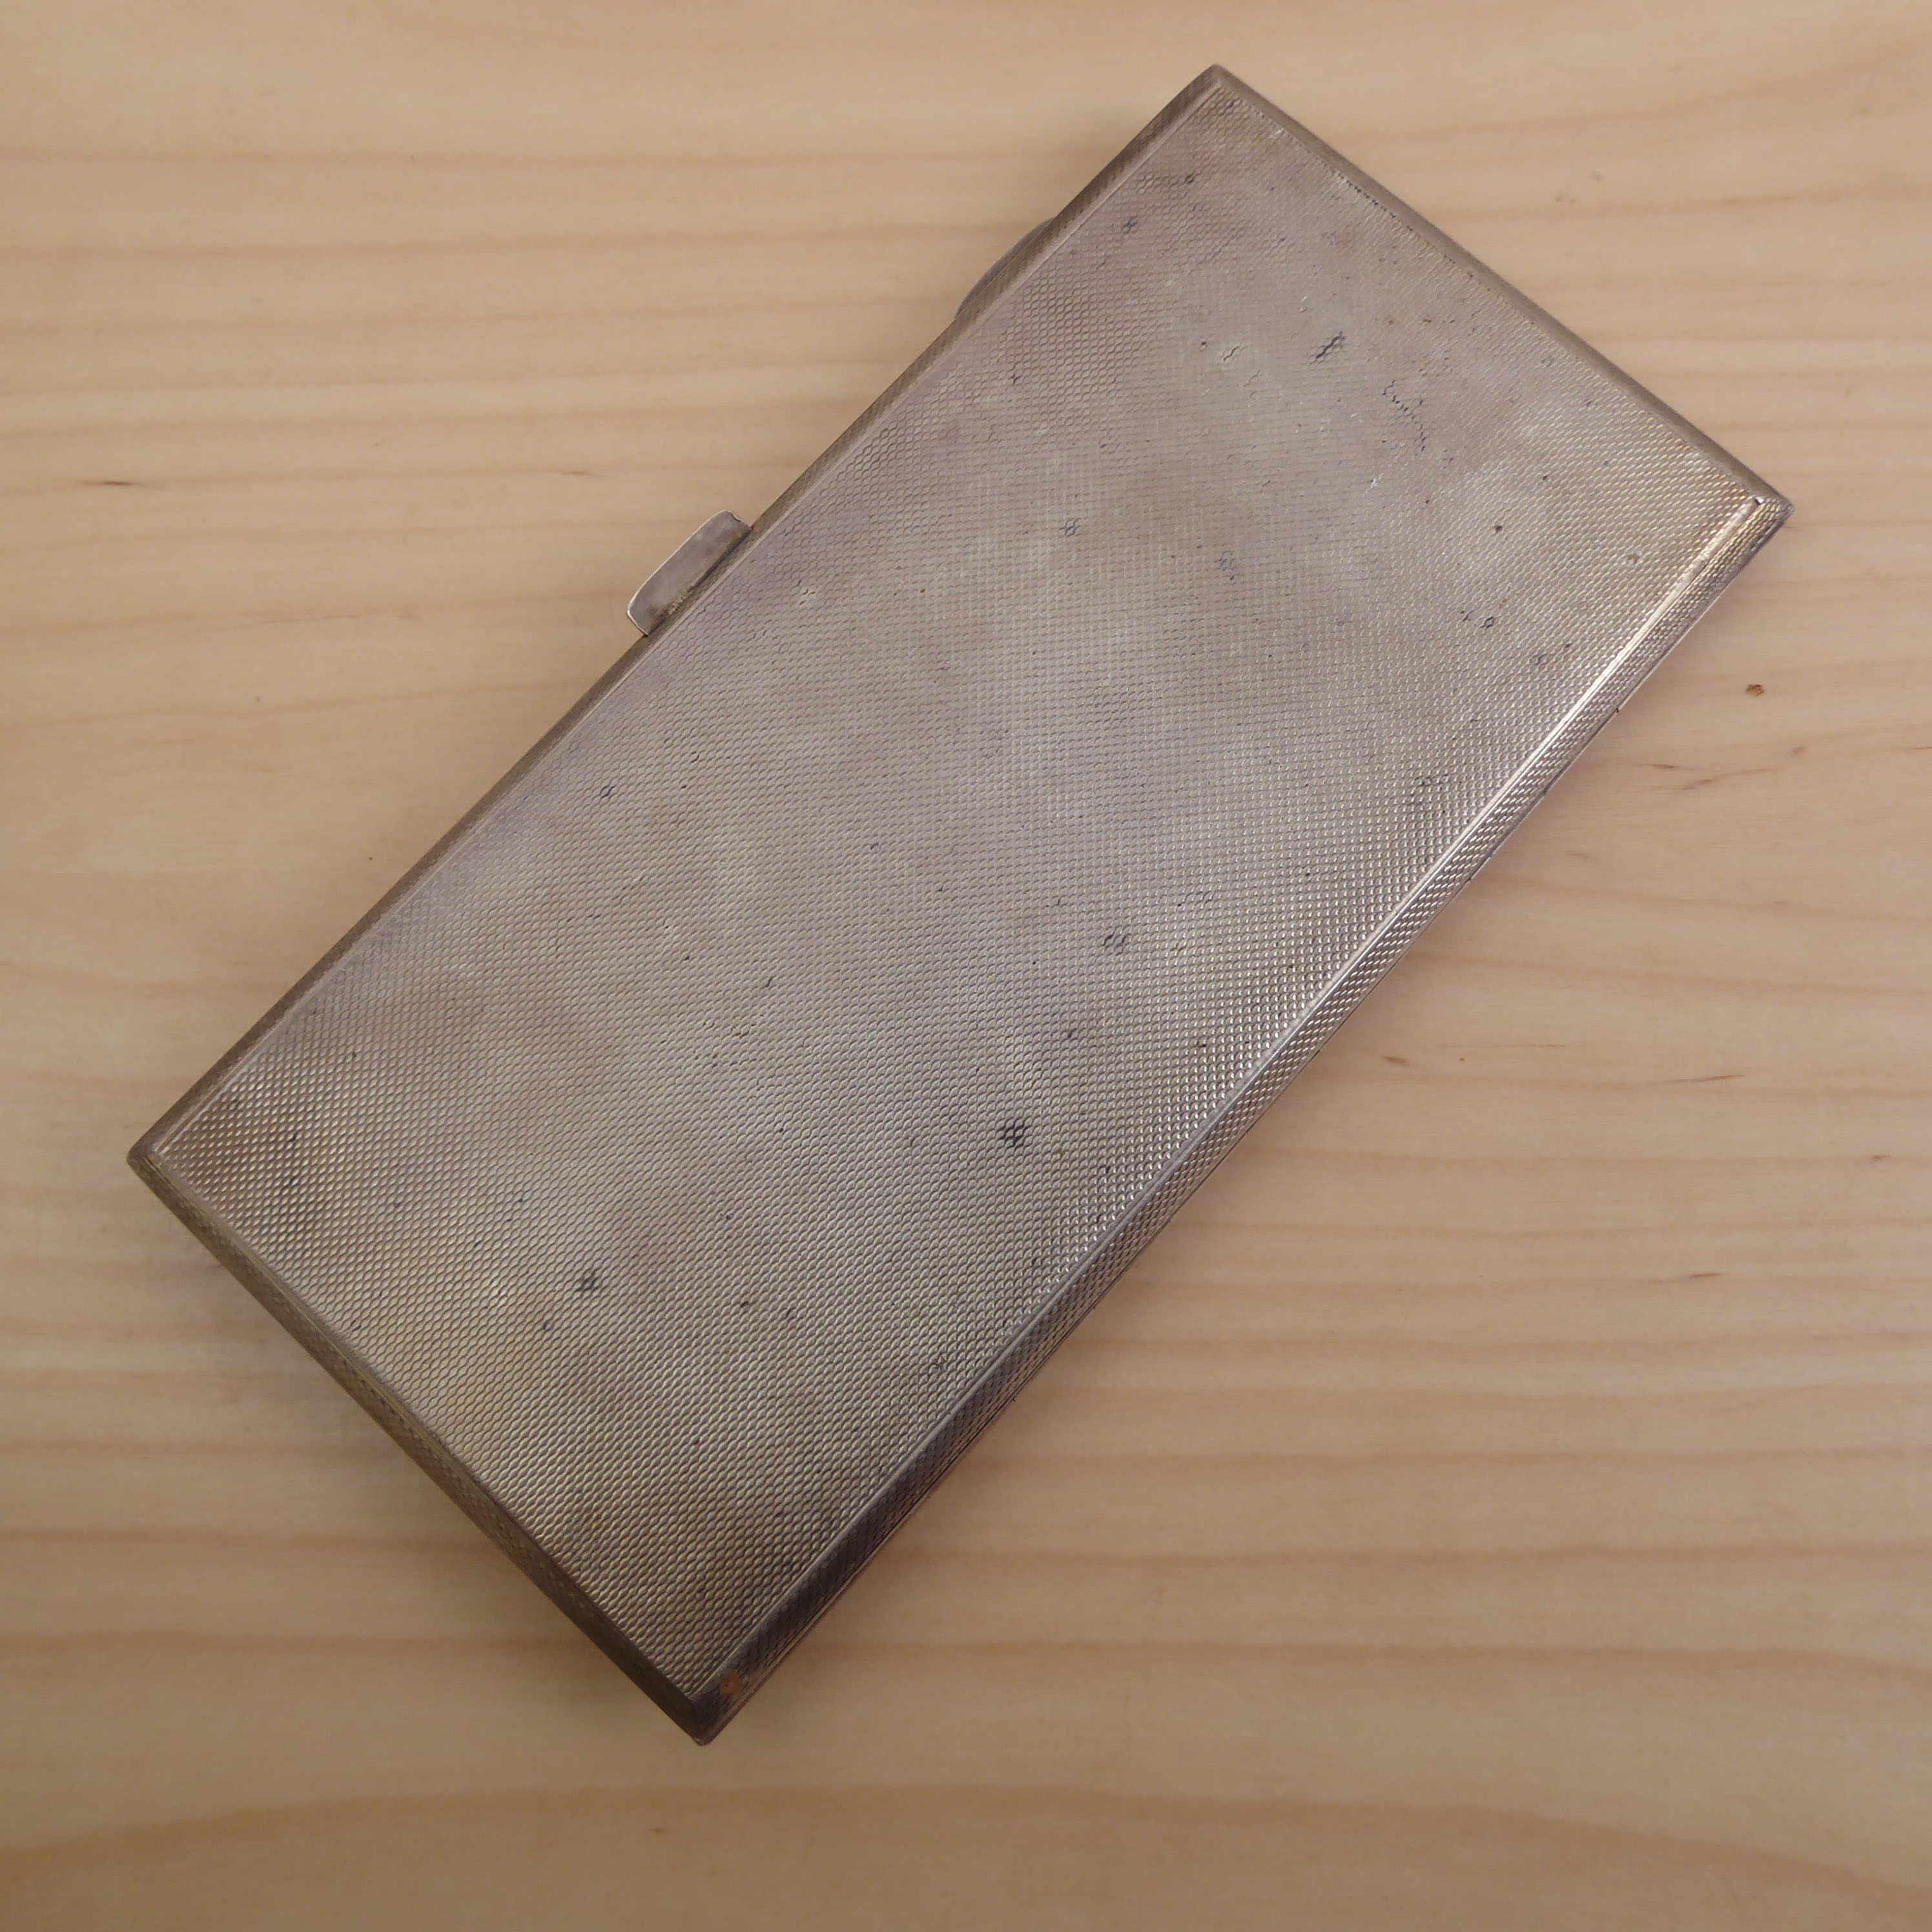 A George VI silver double cigarette case - Charles Edward Turner, Birm. 1941, rectangular with - Image 8 of 8